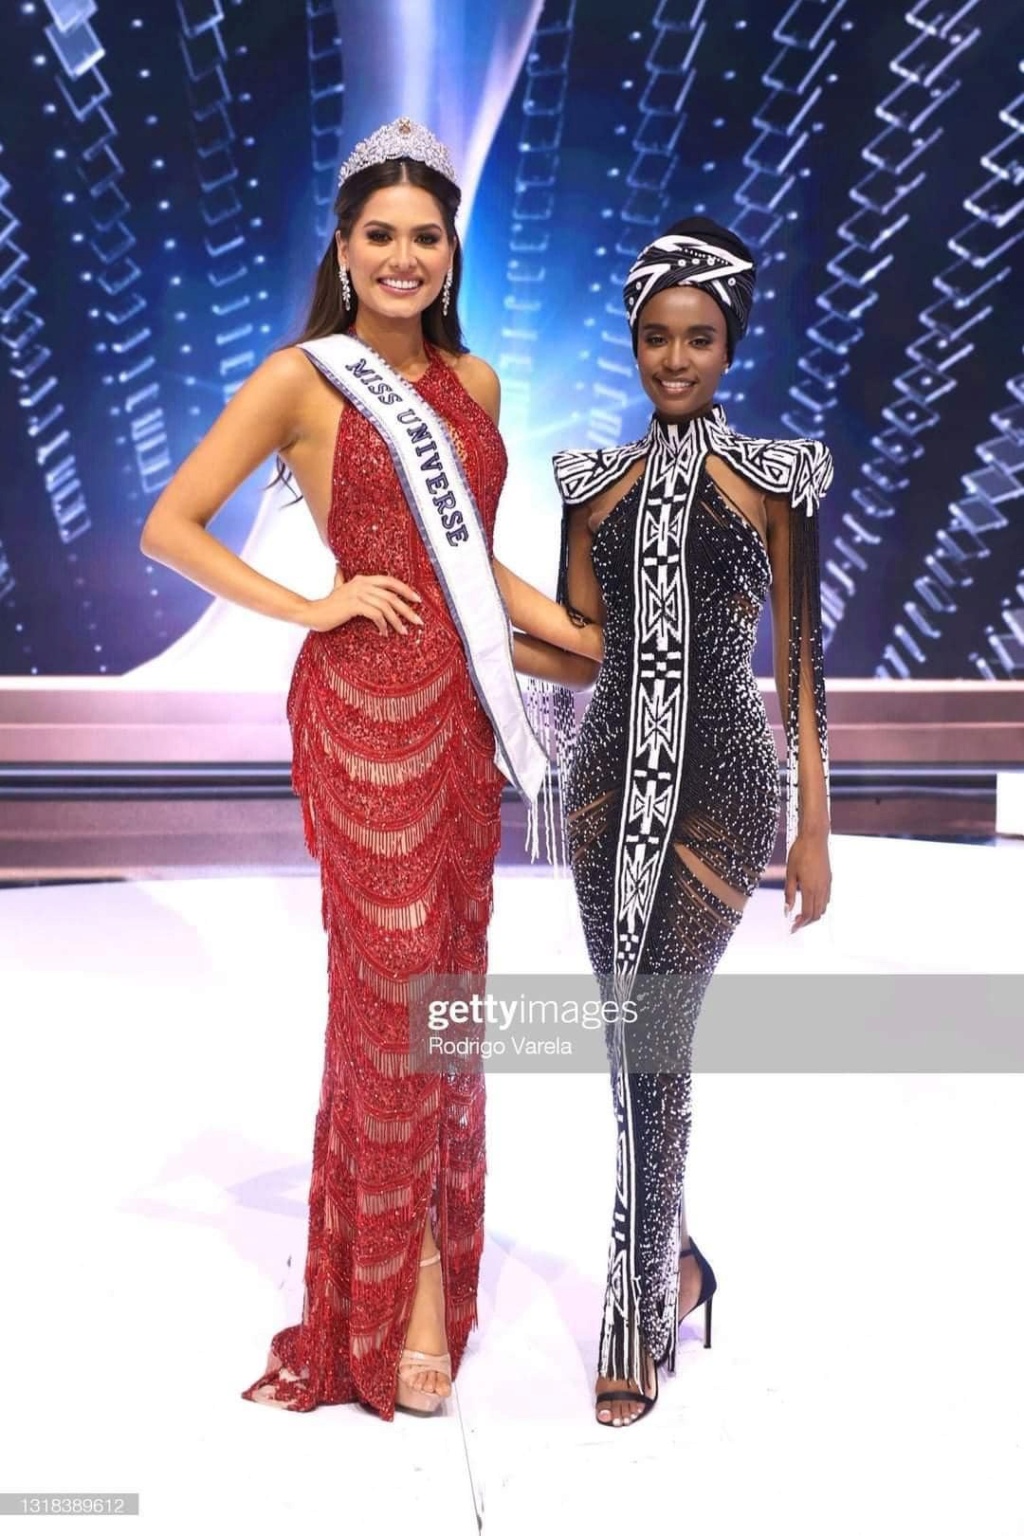 The Official Thread Of Miss Universe 2020 - Andrea Meza of Mexico  18656010